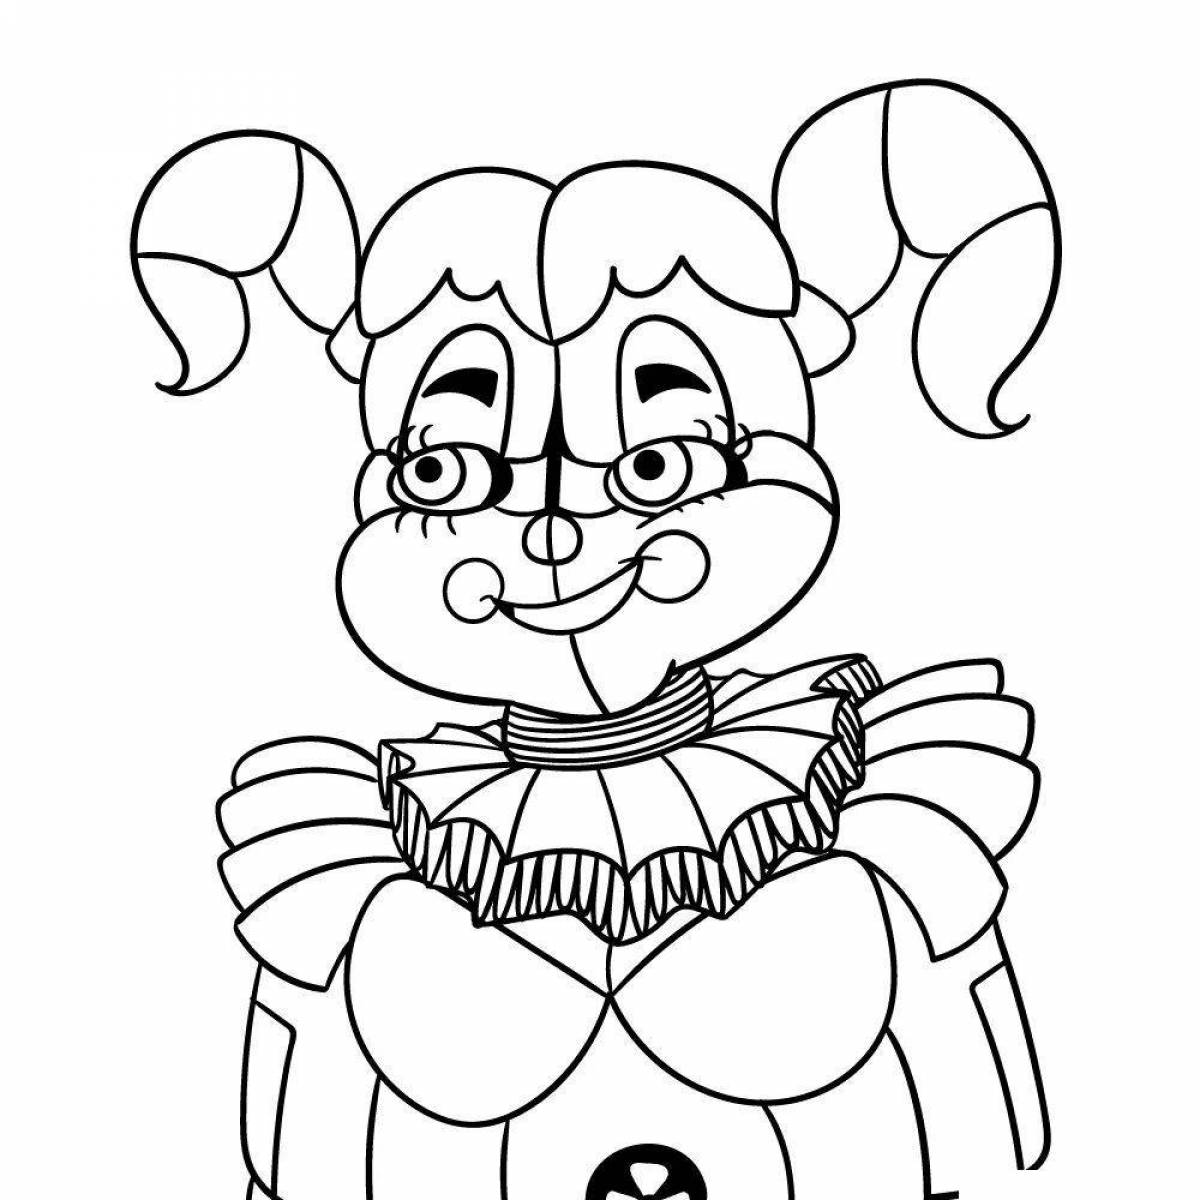 Blessed charon baby coloring page